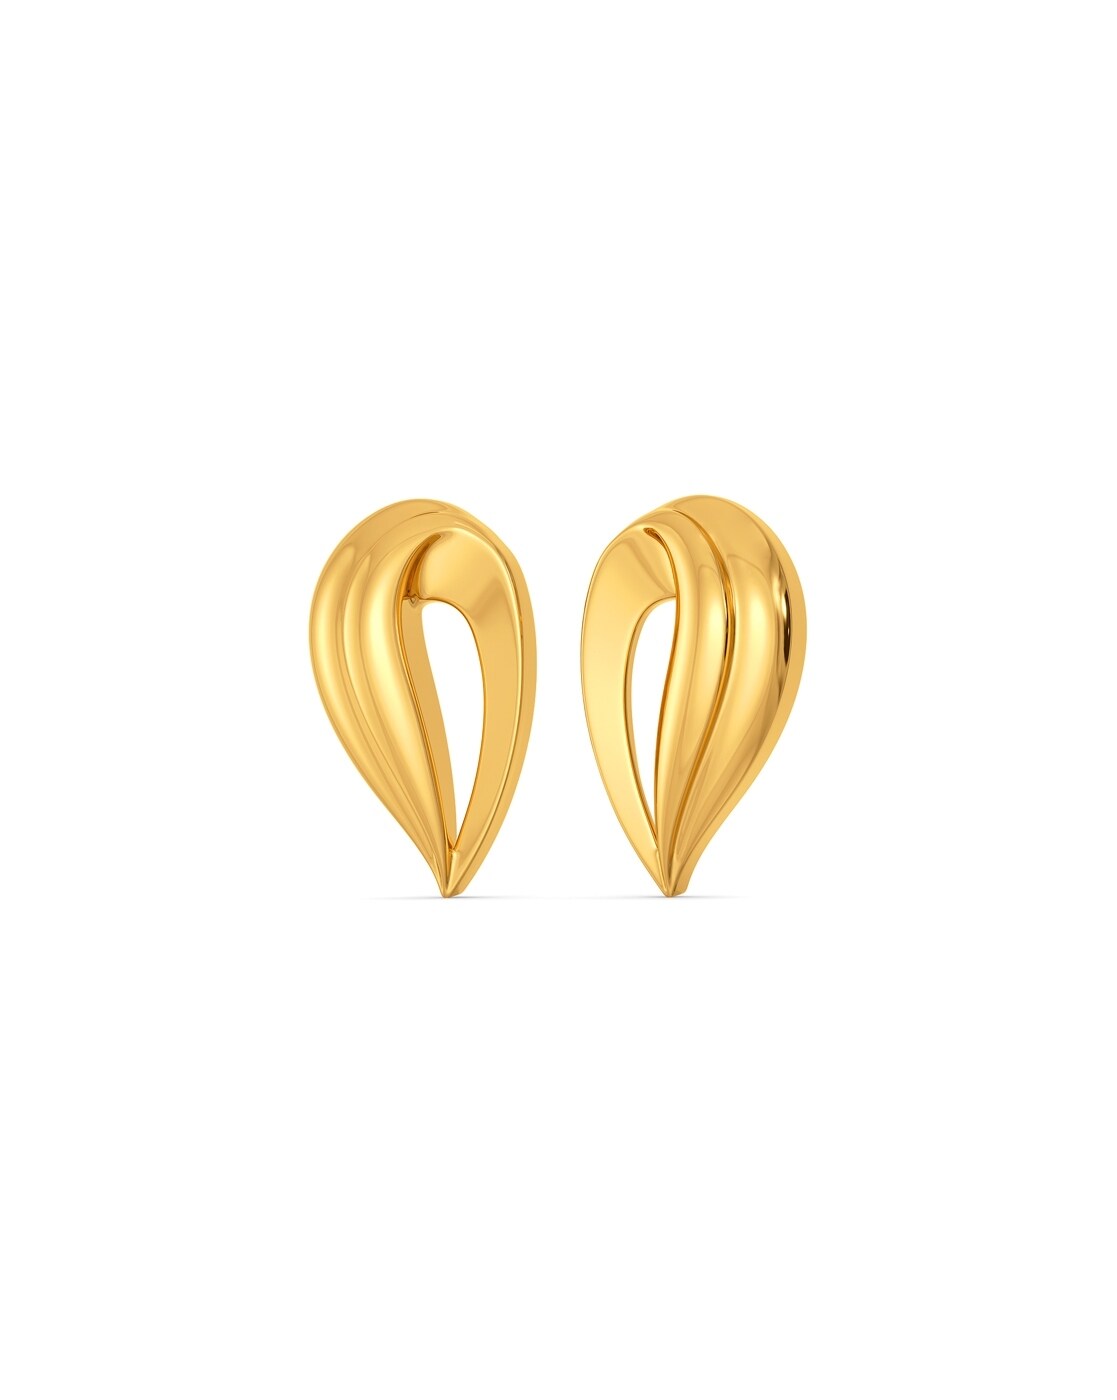 Melorra Plait Shields Gold Earrings Yellow Gold 18kt Stud Earring Price in  India  Buy Melorra Plait Shields Gold Earrings Yellow Gold 18kt Stud  Earring online at Shopsyin